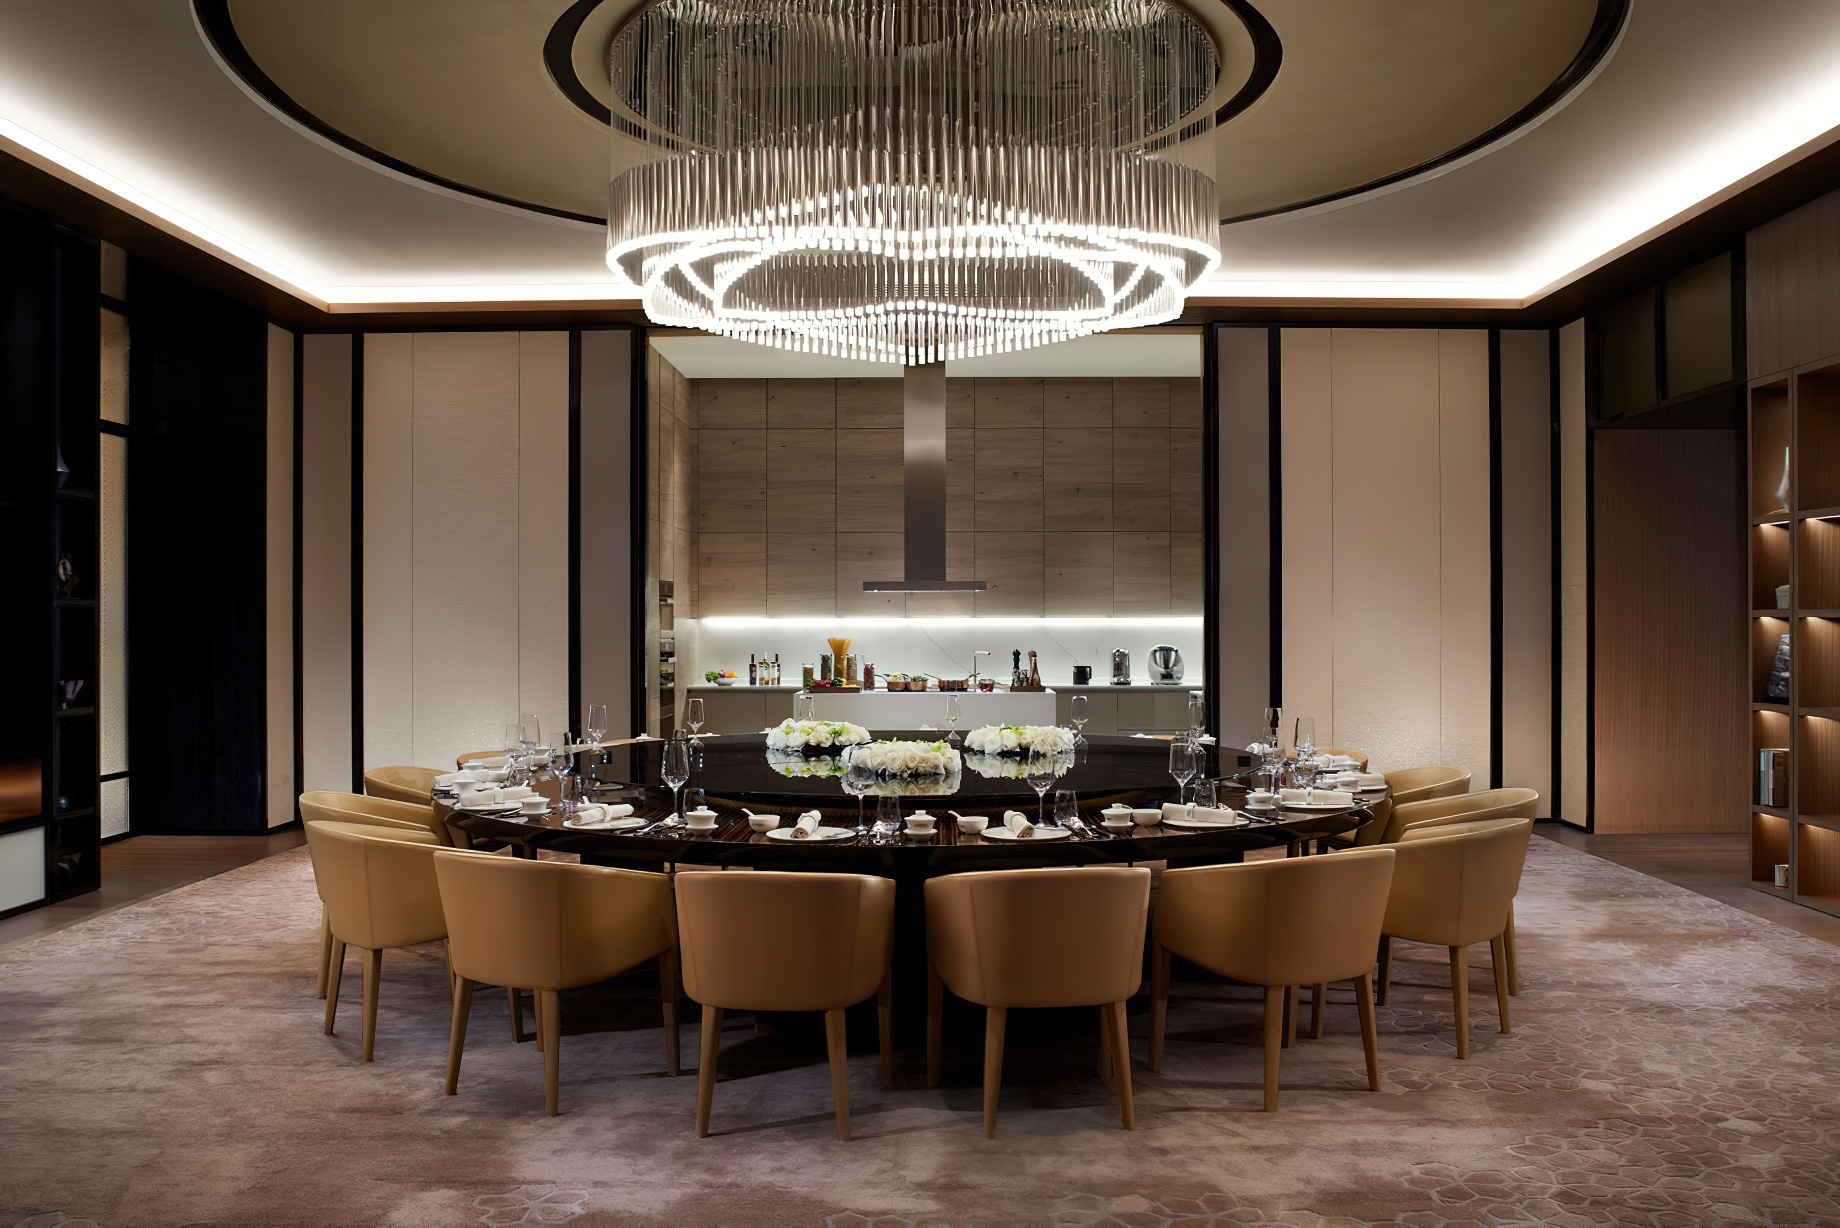 The Ritz-Carlton, Xi’an Hotel – Shaanxi, China – Presidential Suite Dining Room